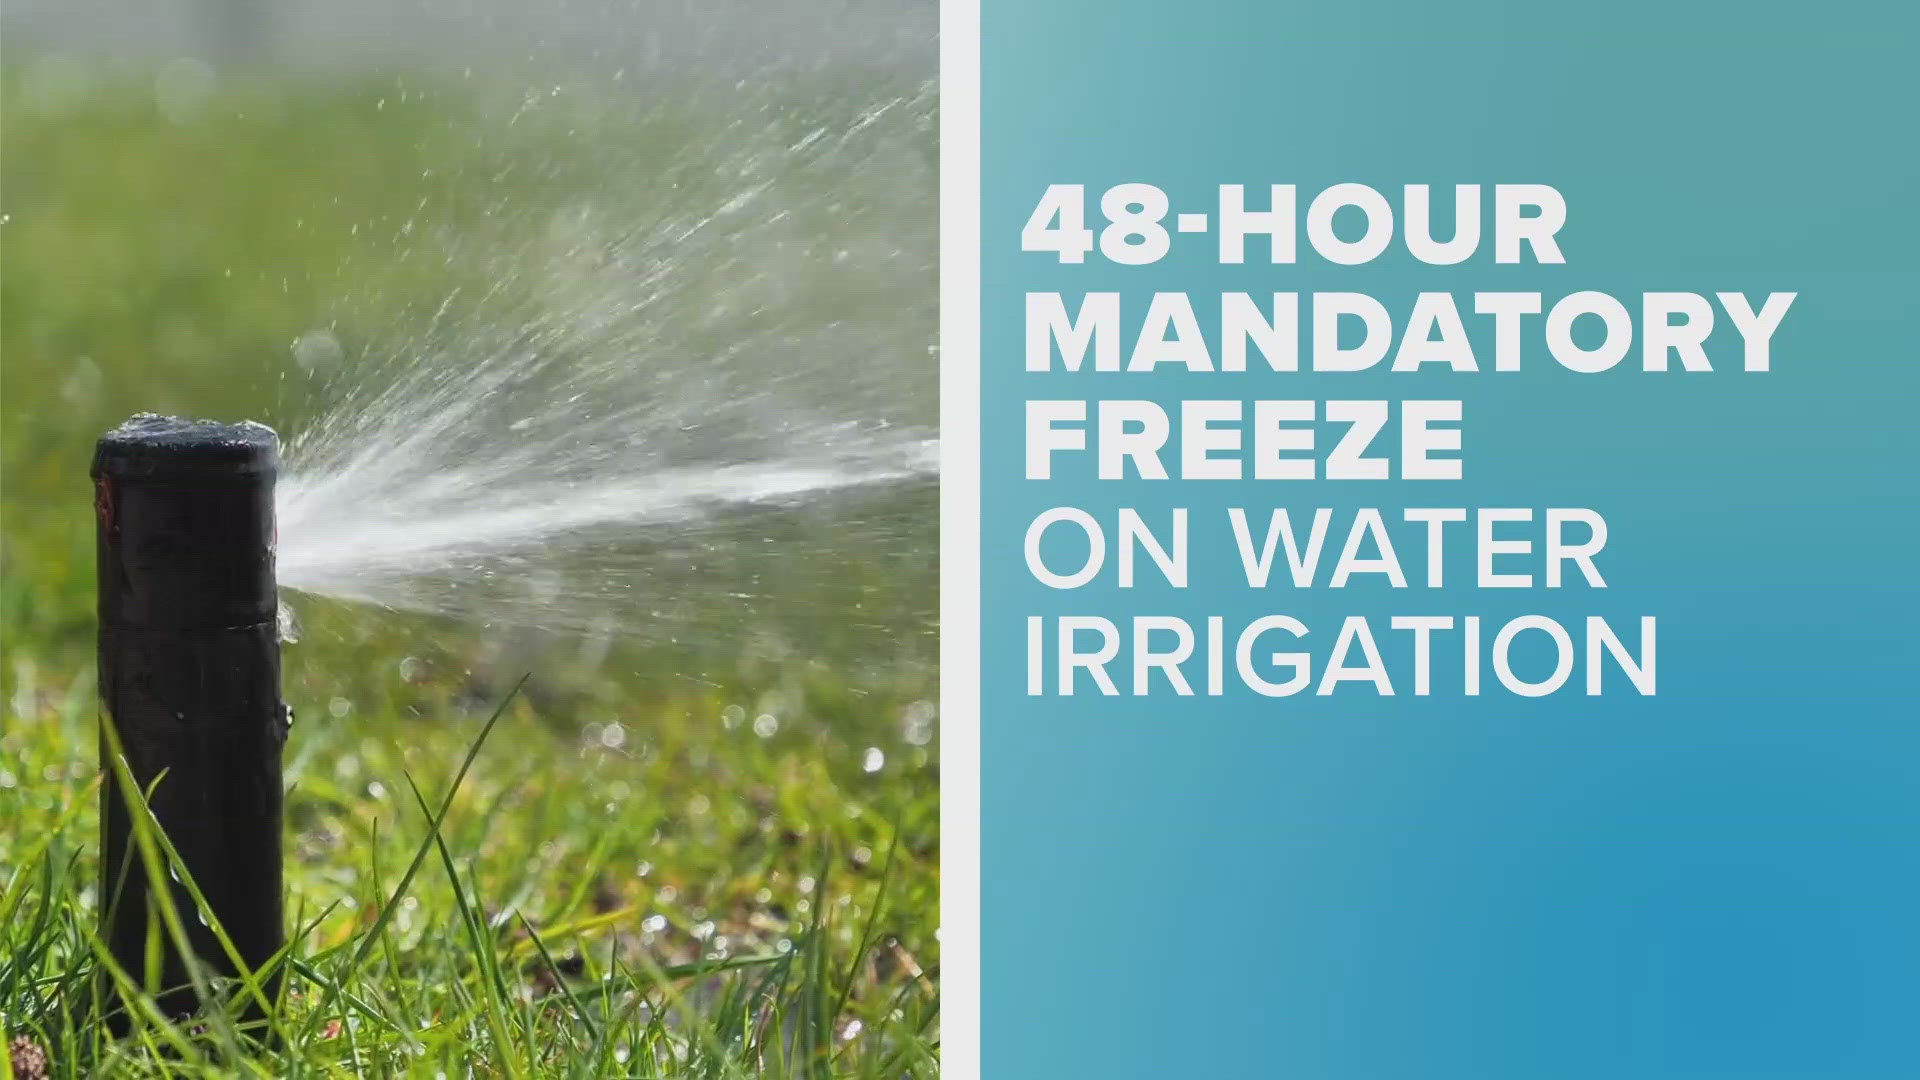 RCH issued a ban on lawn irrigation Thursday after residents surpassed the utility's water allotment by 600,000 gallons.